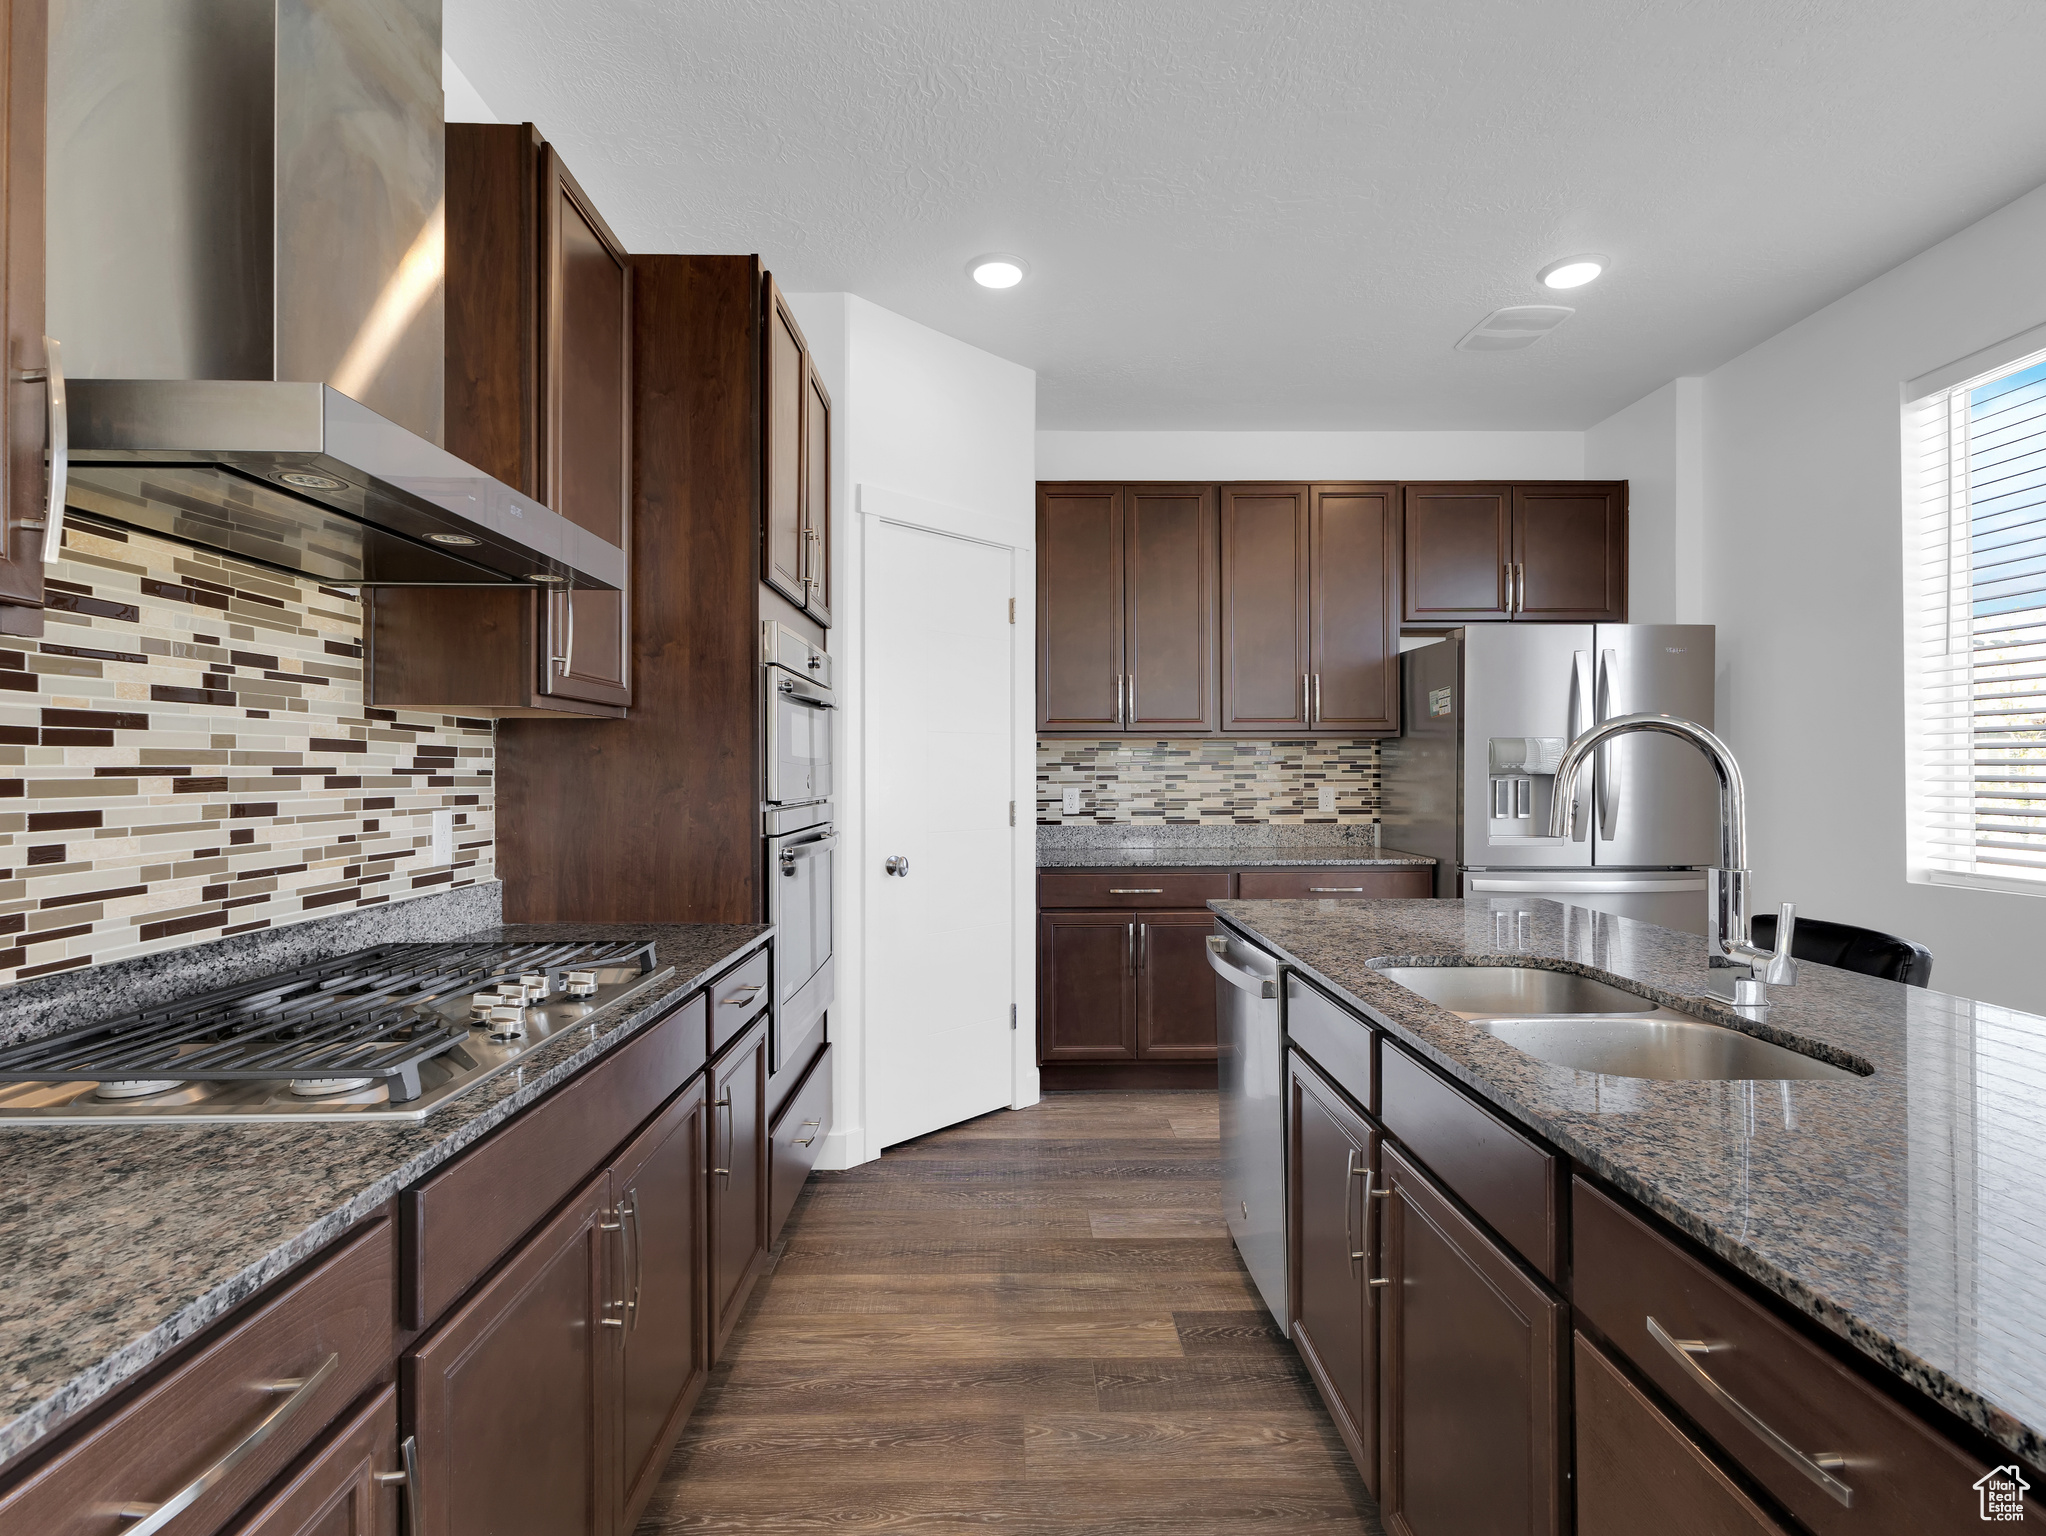 Kitchen featuring wall chimney exhaust hood, dark hardwood / wood-style floors, appliances with stainless steel finishes, sink, and tasteful backsplash